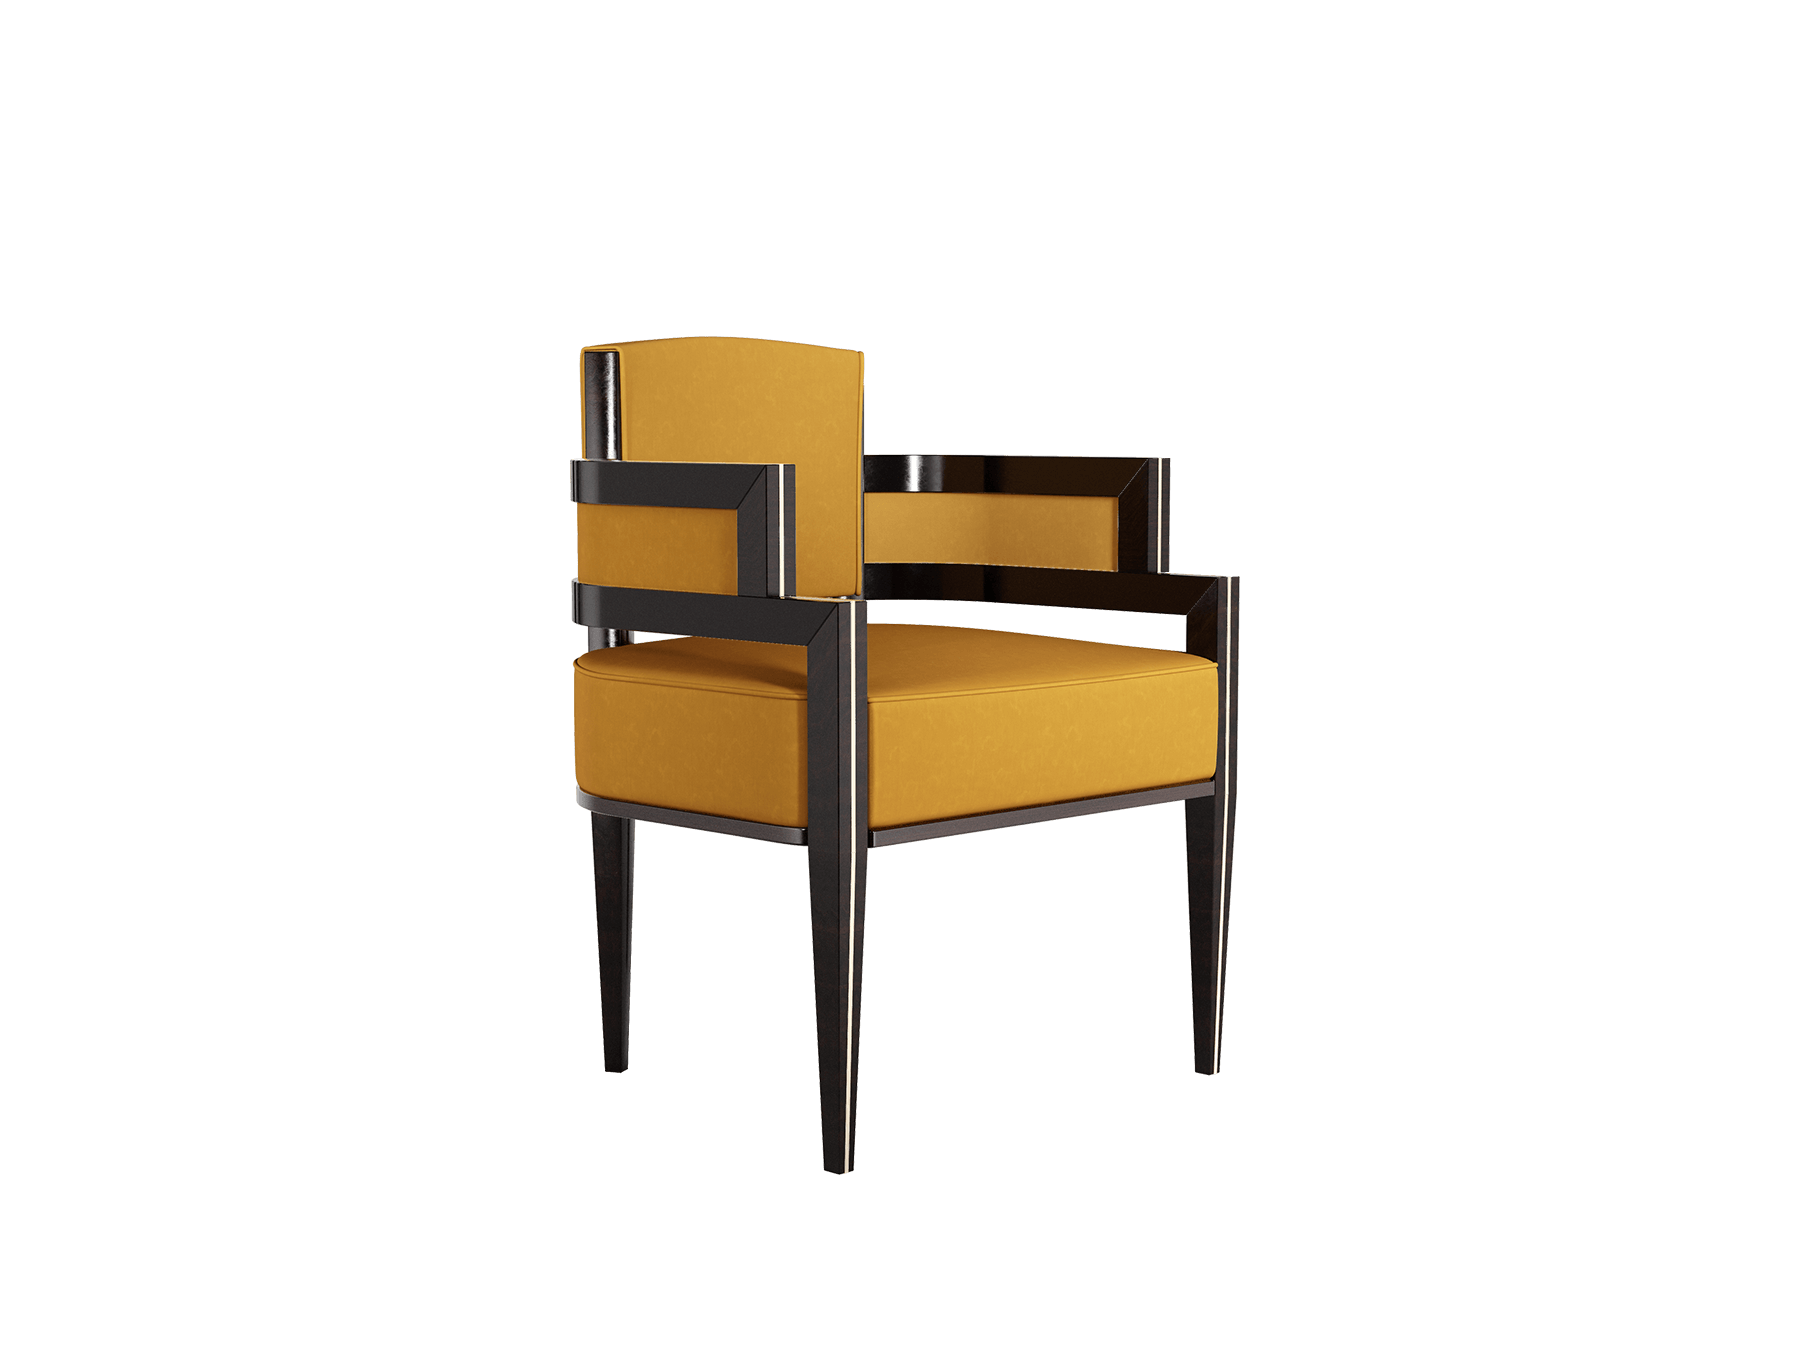 art deco style chair for contemporary dining room projects